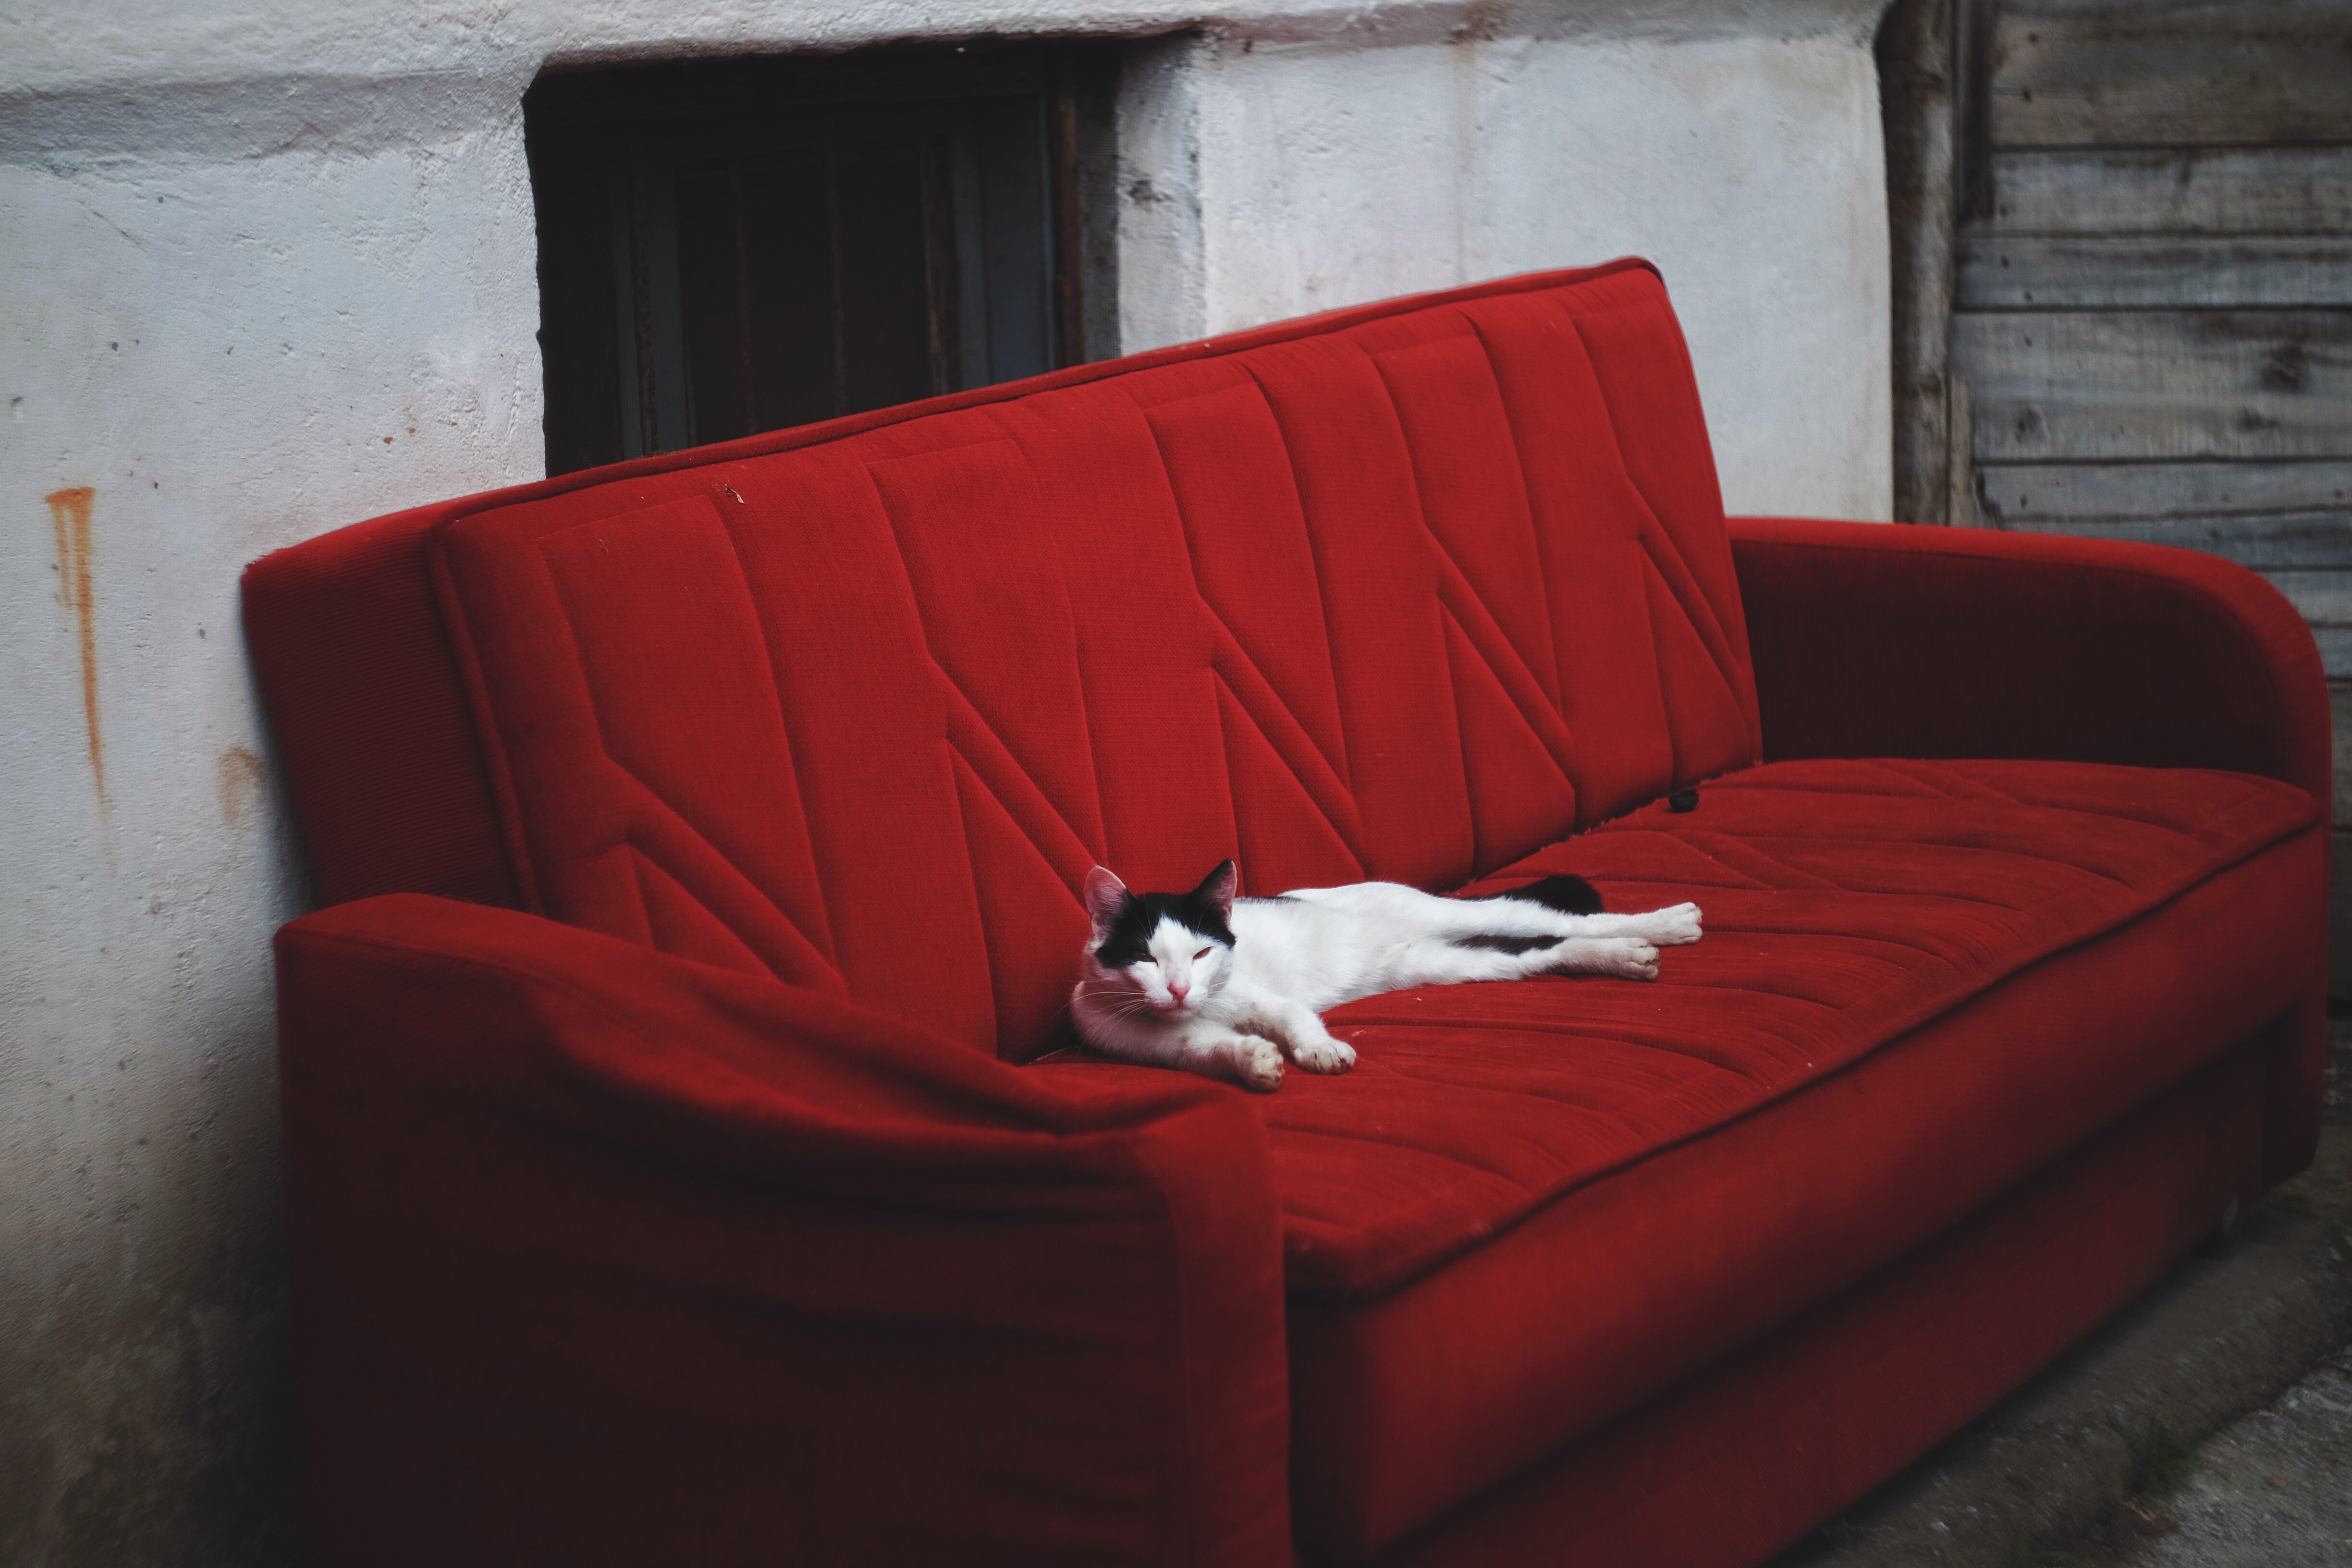 The cat lies on the red couch